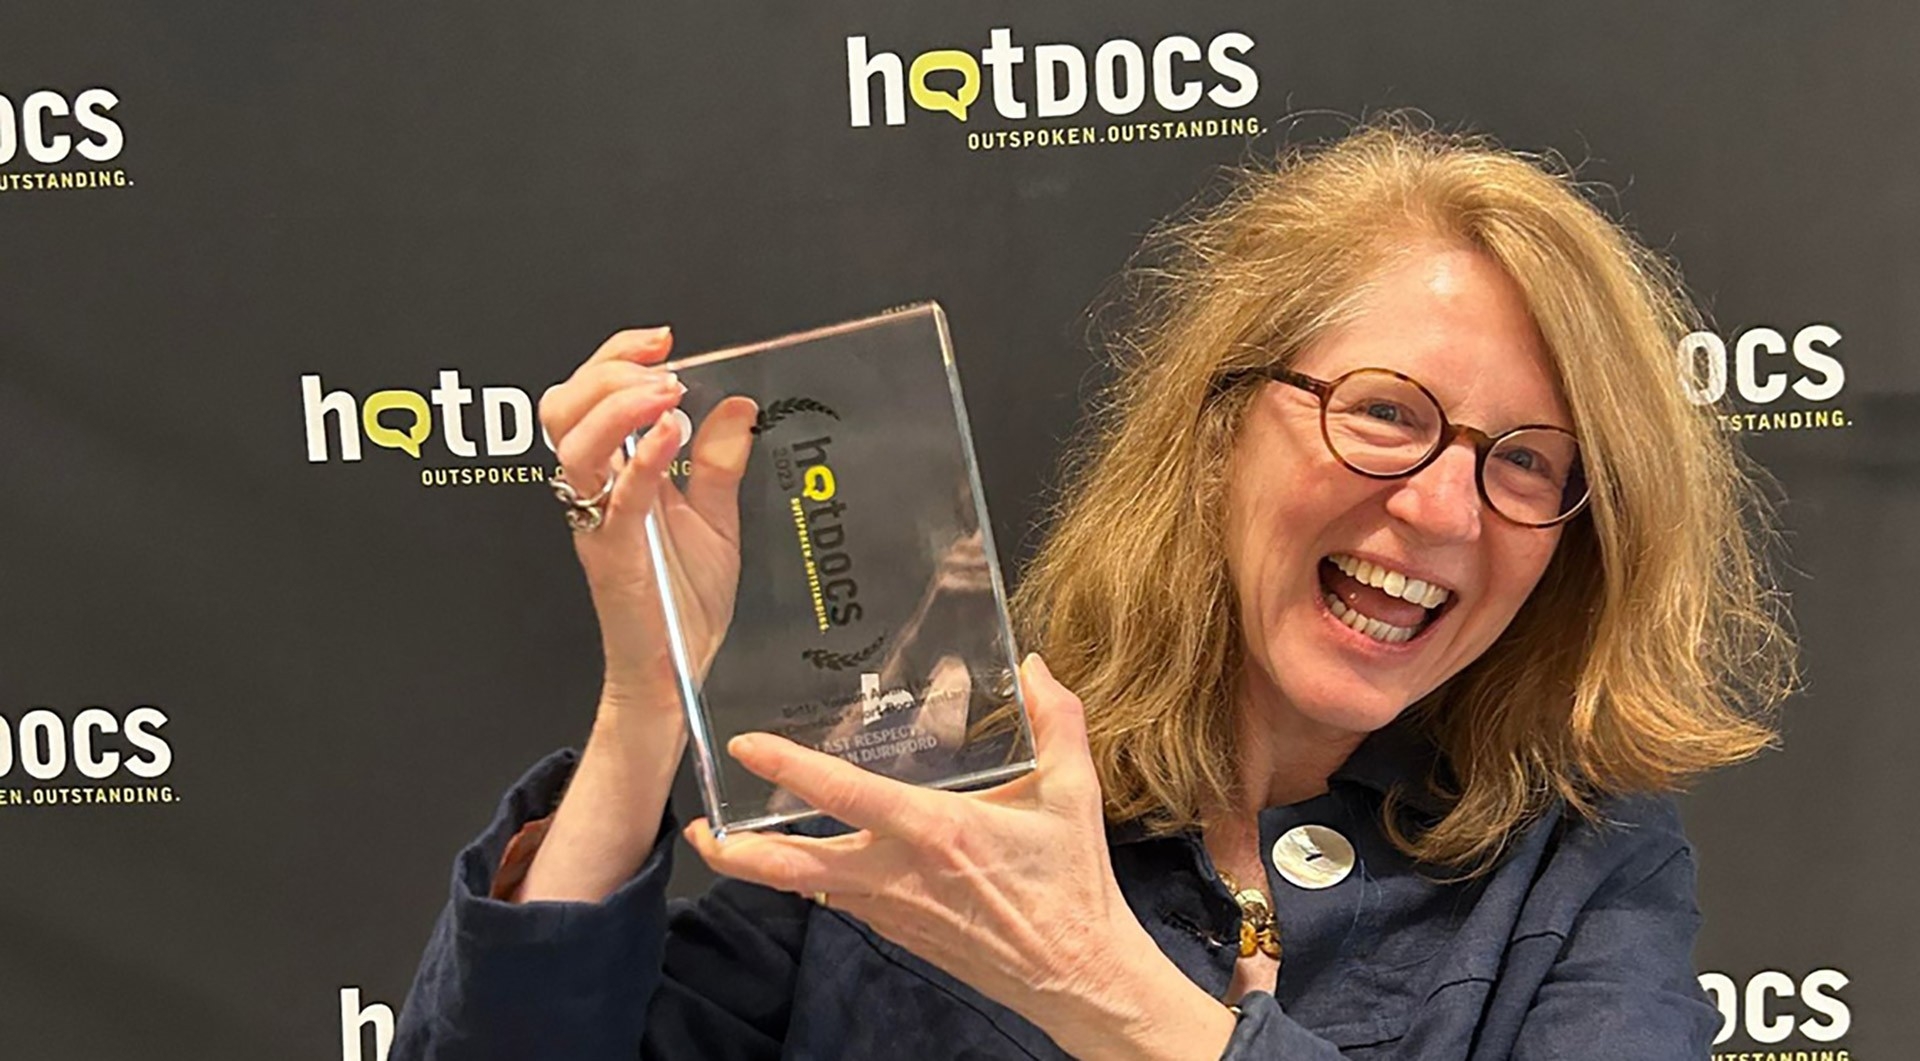 A blonde women with glasses smiles and holds an award aloft